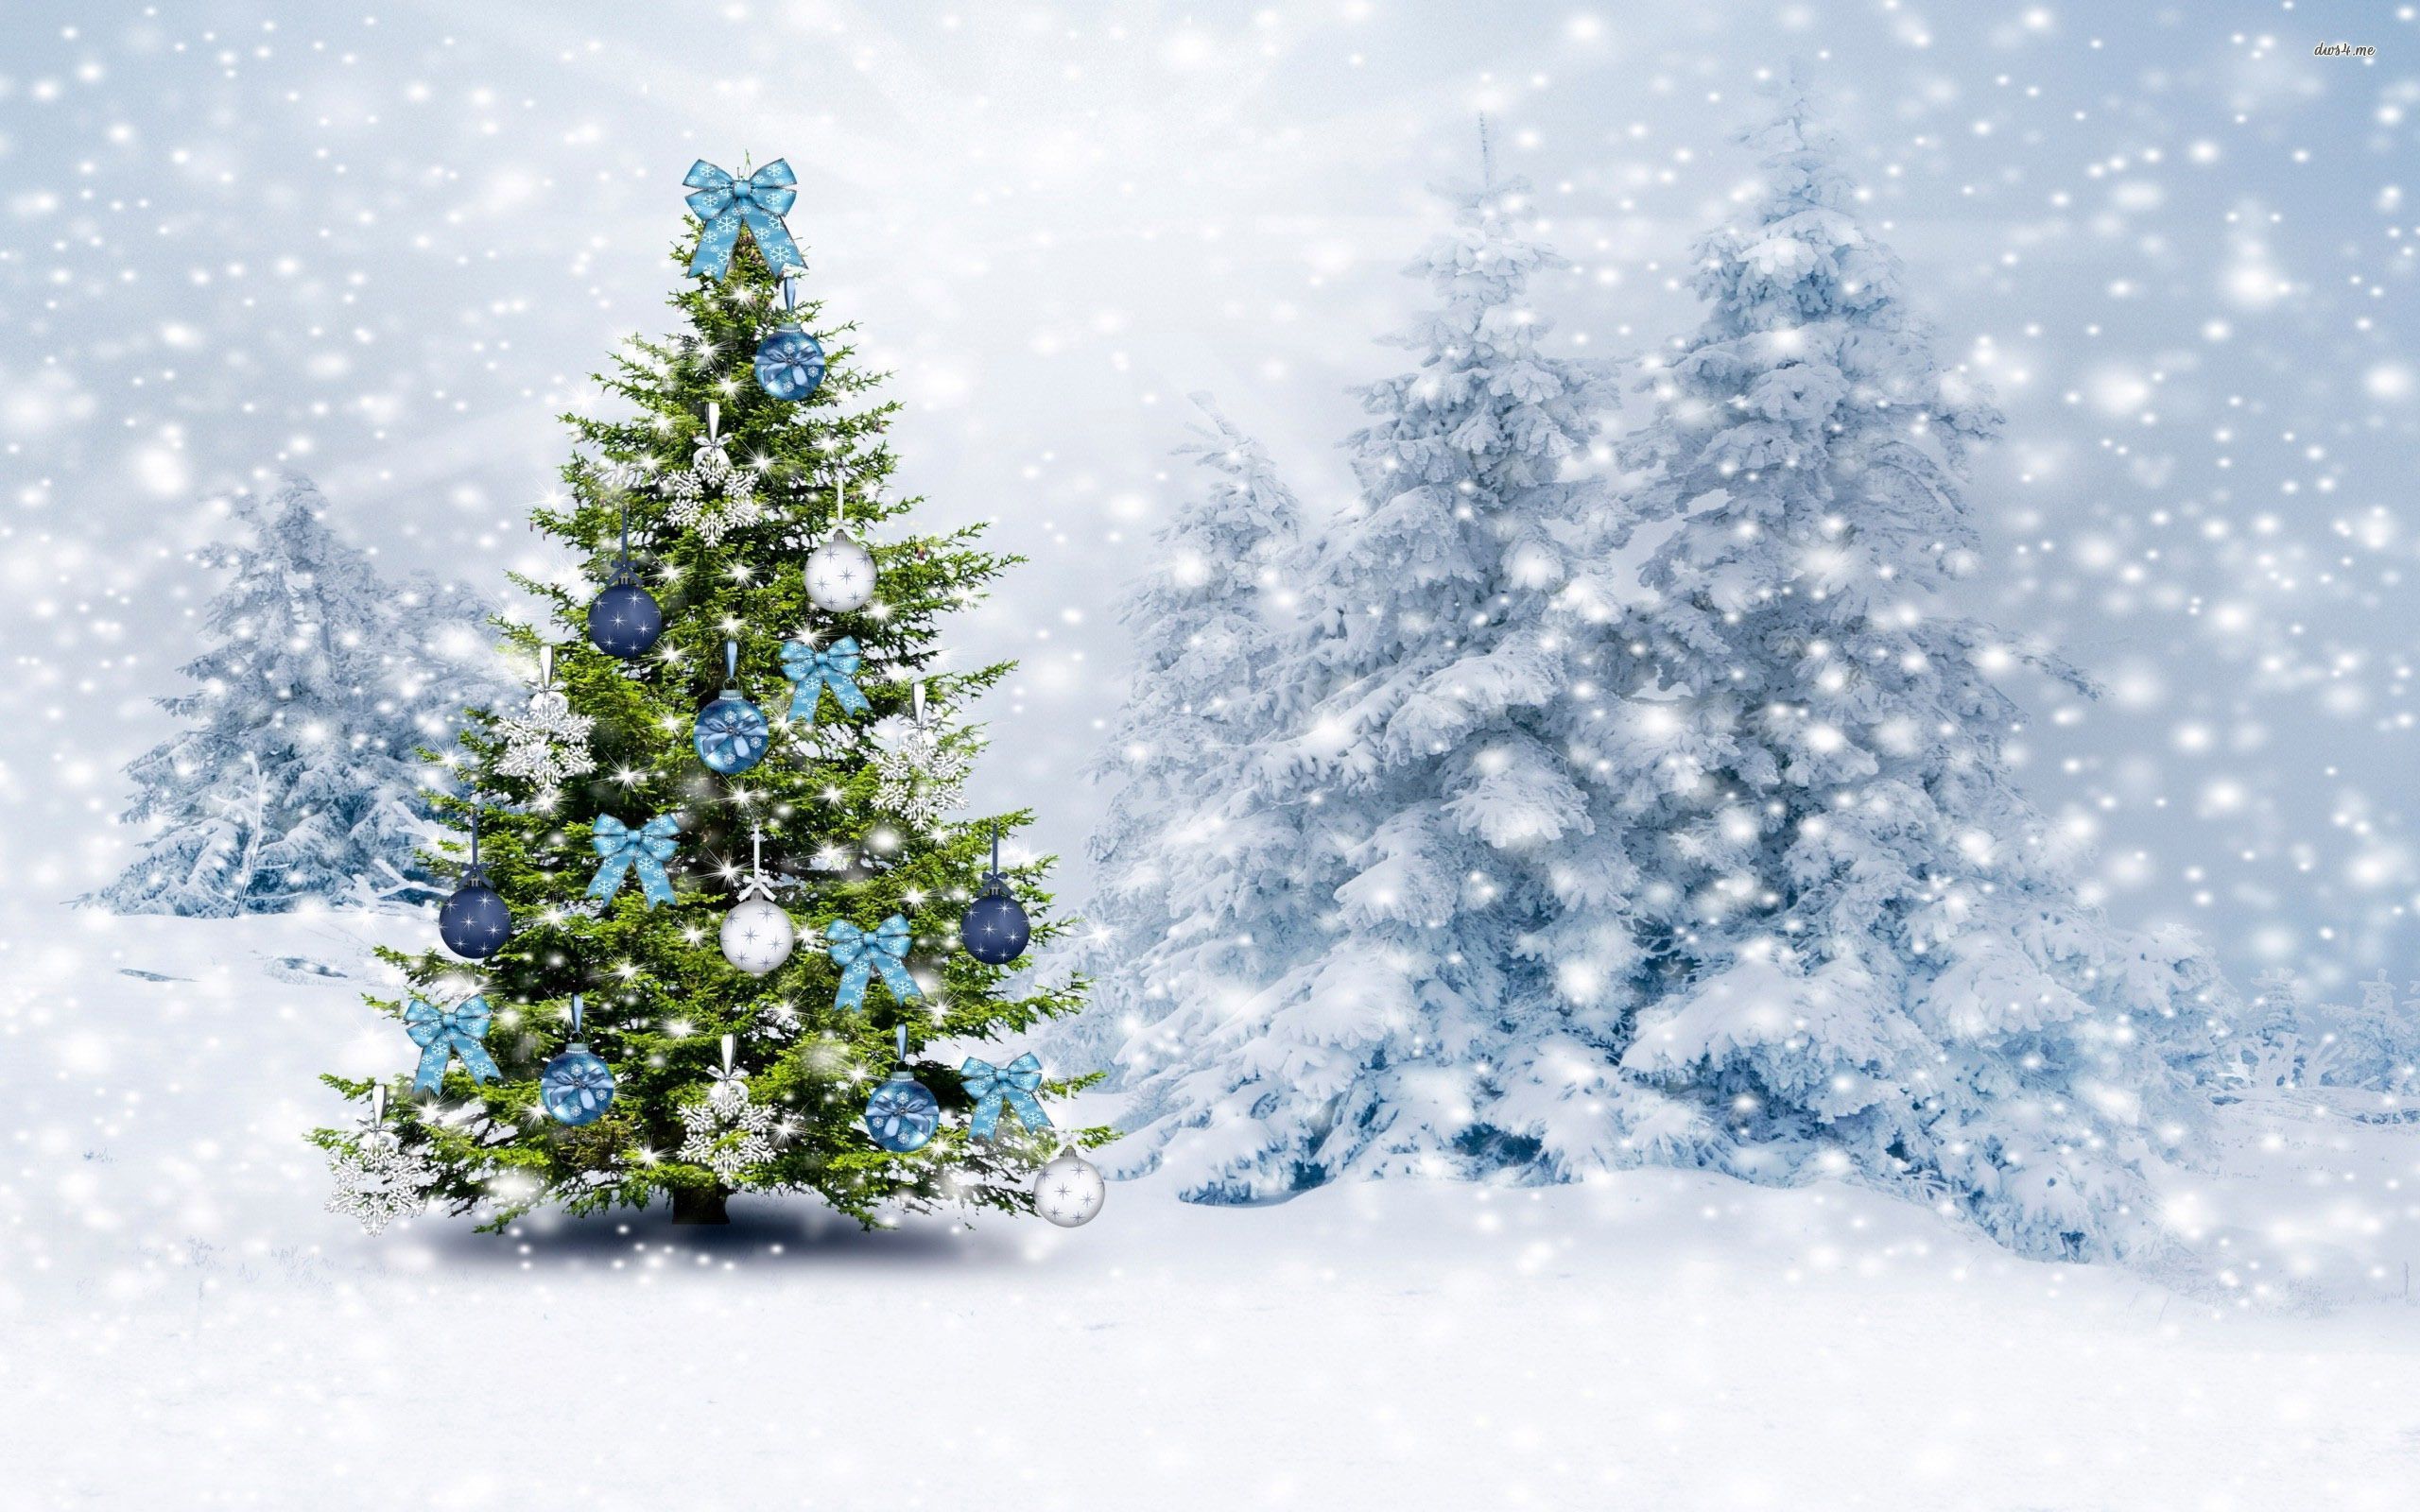 Christmas tree in the snowy forest HD wallpaper. Christmas tree wallpaper, Christmas tree background, Christmas backdrops